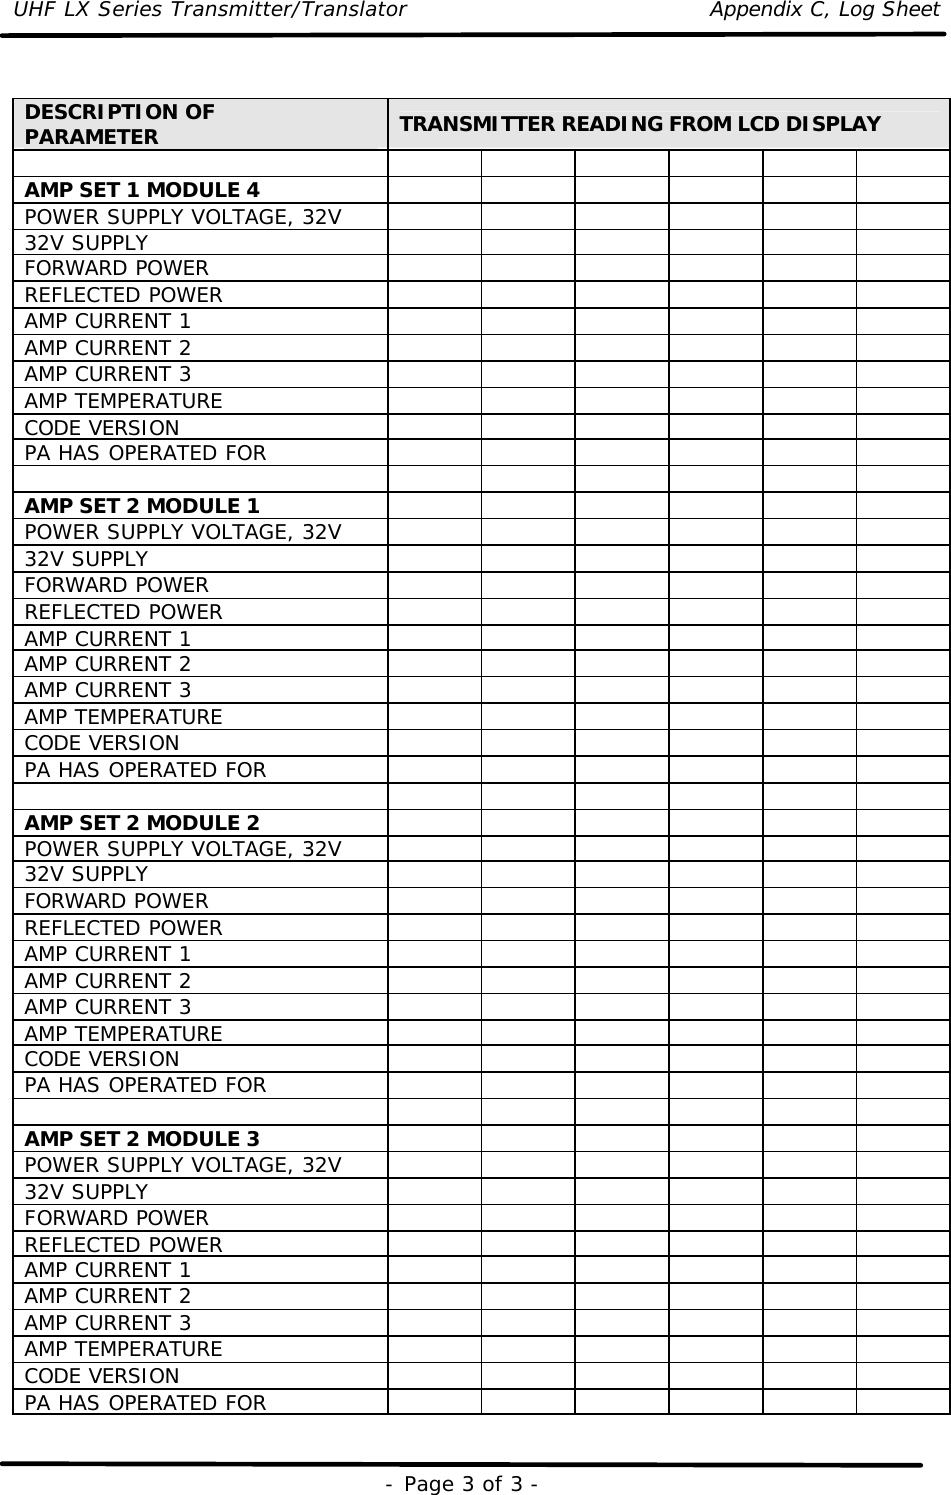 UHF LX Series Transmitter/Translator    Appendix C, Log Sheet   - Page 3 of 3 -  DESCRIPTION OF PARAMETER TRANSMITTER READING FROM LCD DISPLAY         AMP SET 1 MODULE 4       POWER SUPPLY VOLTAGE, 32V       32V SUPPLY        FORWARD POWER        REFLECTED POWER        AMP CURRENT 1        AMP CURRENT 2        AMP CURRENT 3        AMP TEMPERATURE        CODE VERSION        PA HAS OPERATED FOR                AMP SET 2 MODULE 1       POWER SUPPLY VOLTAGE, 32V       32V SUPPLY        FORWARD POWER        REFLECTED POWER        AMP CURRENT 1        AMP CURRENT 2        AMP CURRENT 3        AMP TEMPERATURE        CODE VERSION        PA HAS OPERATED FOR                AMP SET 2 MODULE 2       POWER SUPPLY VOLTAGE, 32V       32V SUPPLY        FORWARD POWER        REFLECTED POWER        AMP CURRENT 1        AMP CURRENT 2        AMP CURRENT 3        AMP TEMPERATURE        CODE VERSION        PA HAS OPERATED FOR                AMP SET 2 MODULE 3       POWER SUPPLY VOLTAGE, 32V       32V SUPPLY        FORWARD POWER        REFLECTED POWER        AMP CURRENT 1        AMP CURRENT 2        AMP CURRENT 3        AMP TEMPERATURE        CODE VERSION        PA HAS OPERATED FOR        